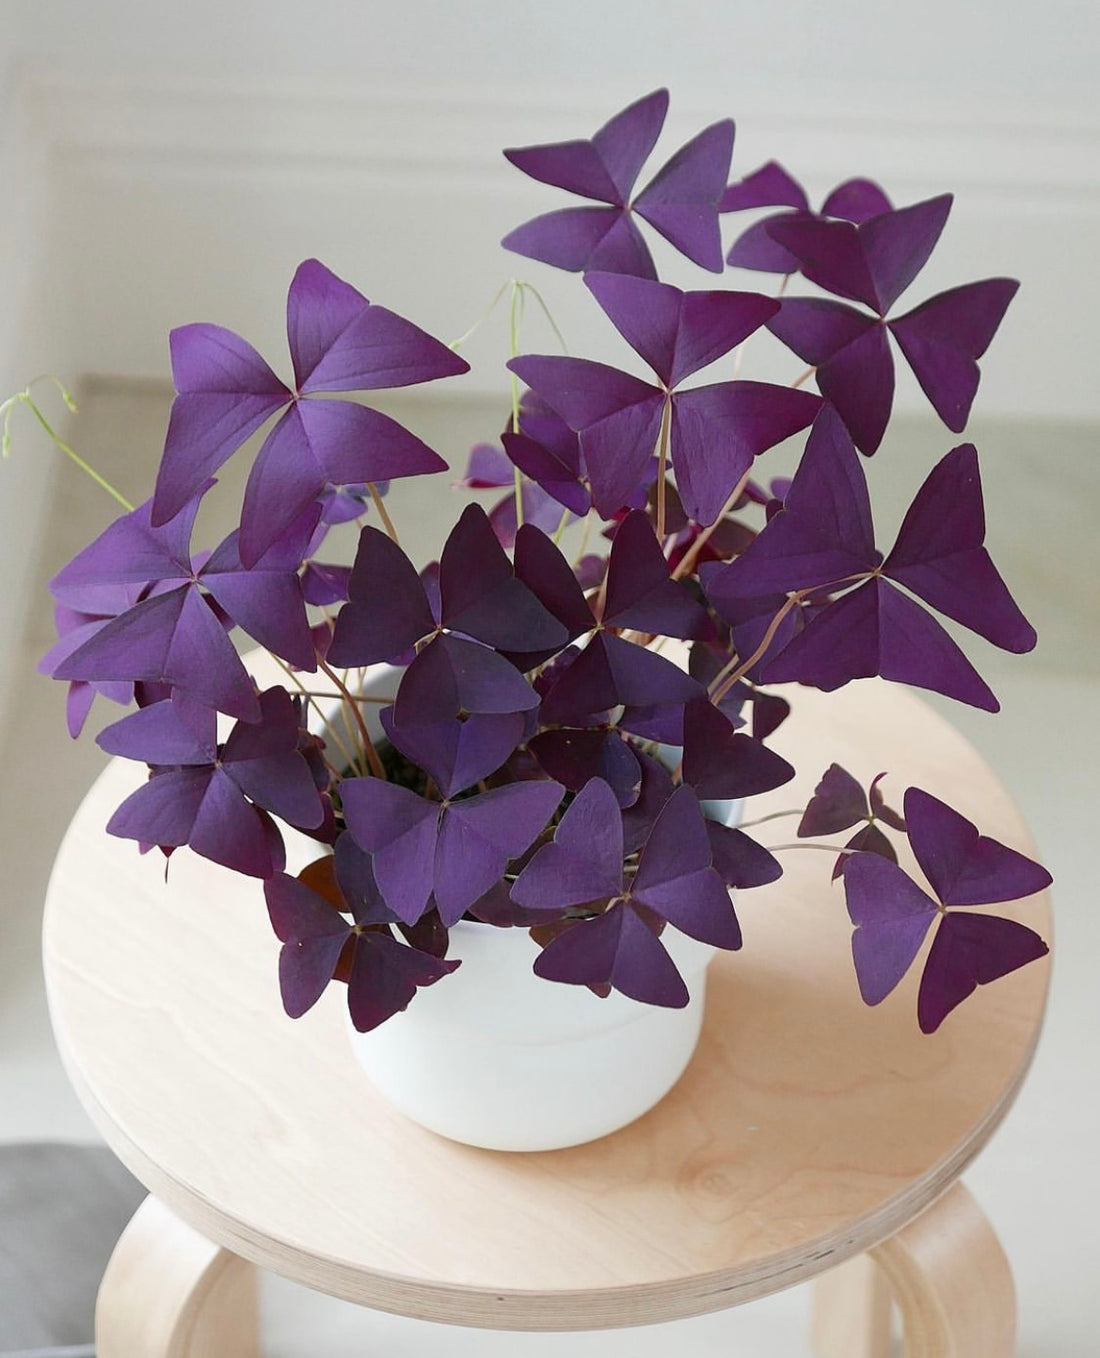 How to grow oxalis triangularis from bulb